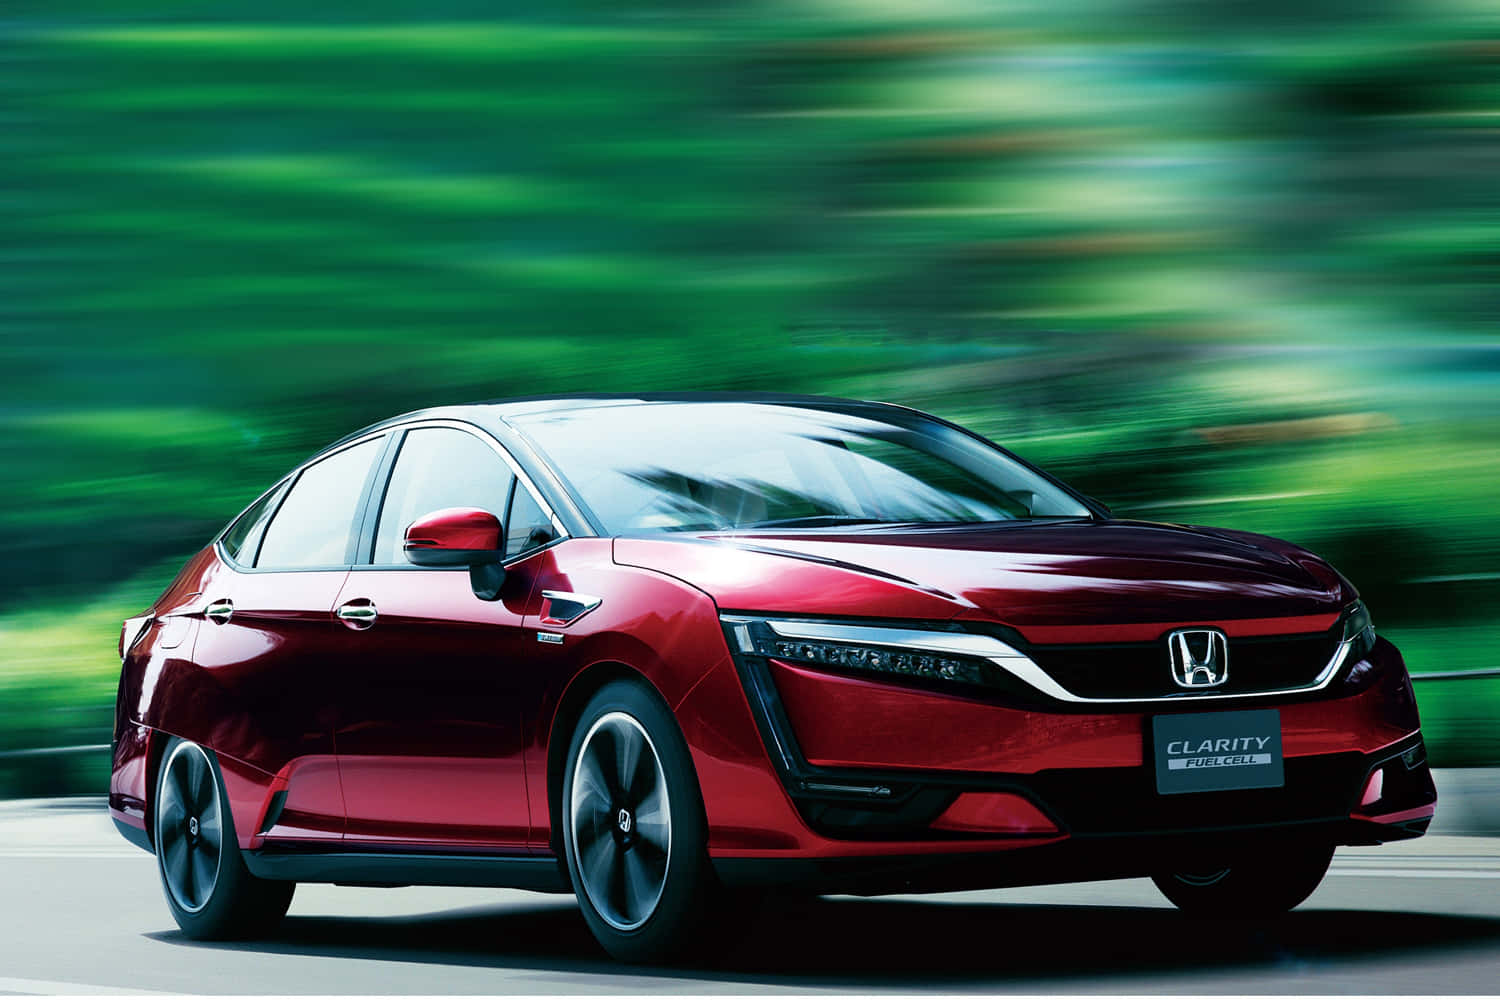 Sleek Honda Clarity parked outdoors in style Wallpaper